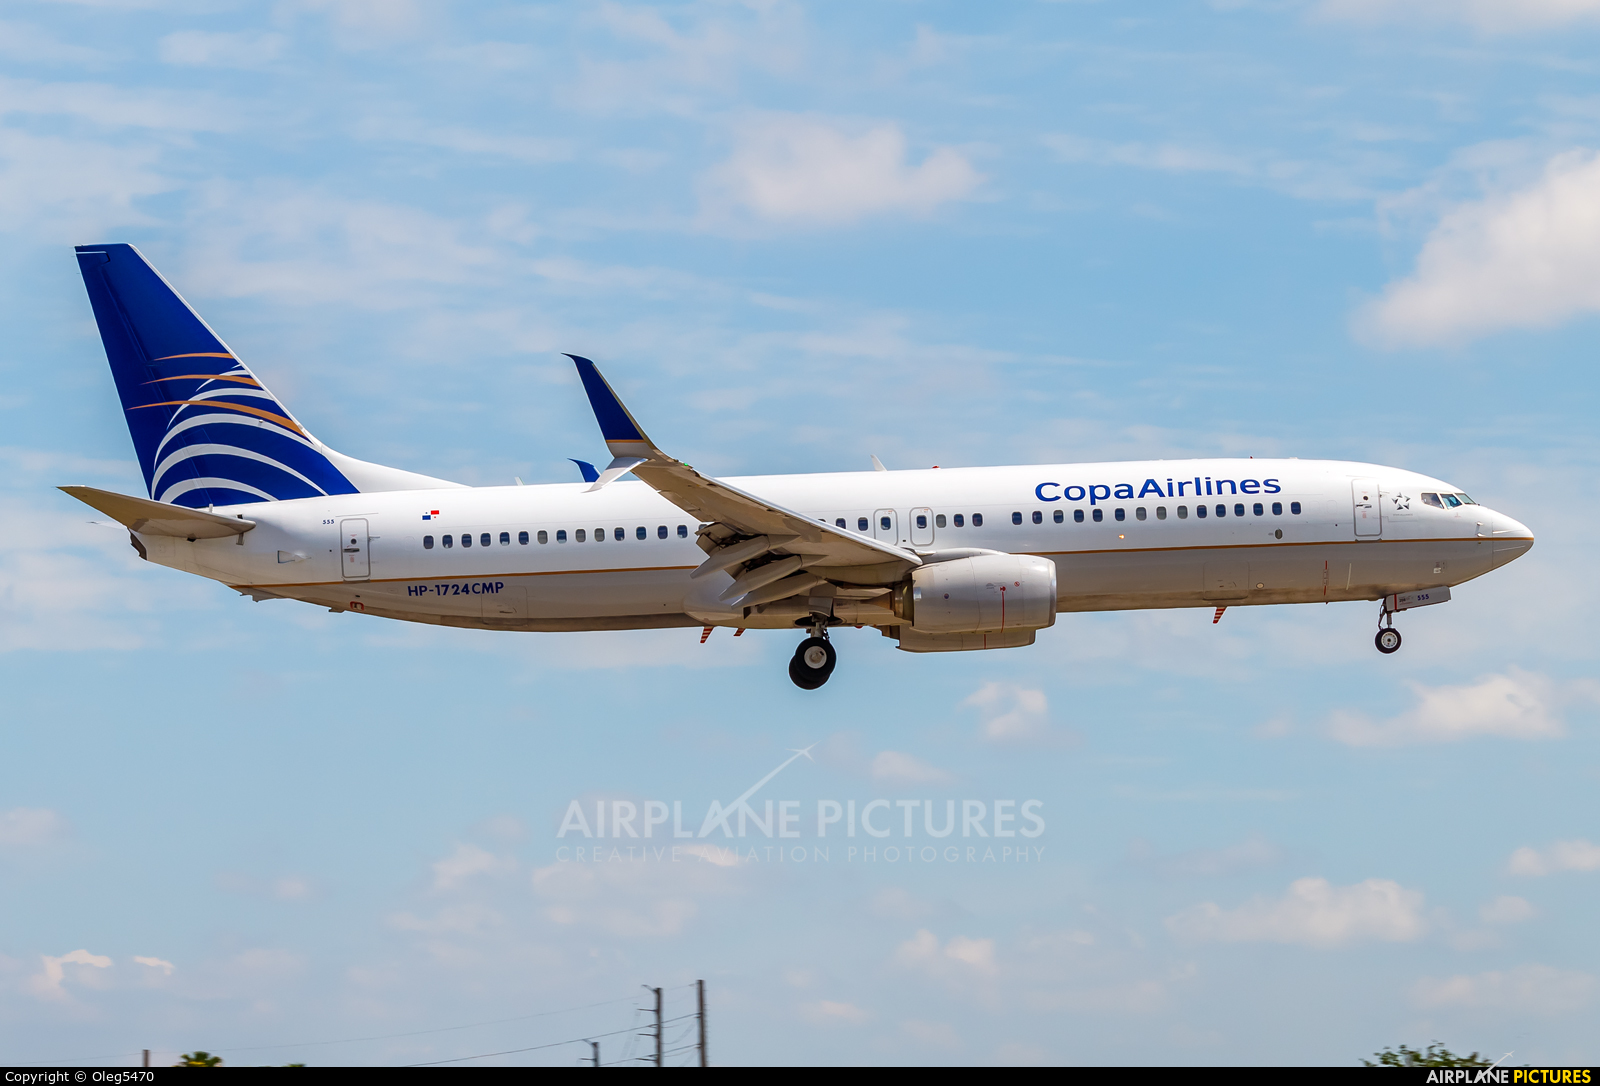 Copa Airlines HP-1724CMP aircraft at Miami Intl